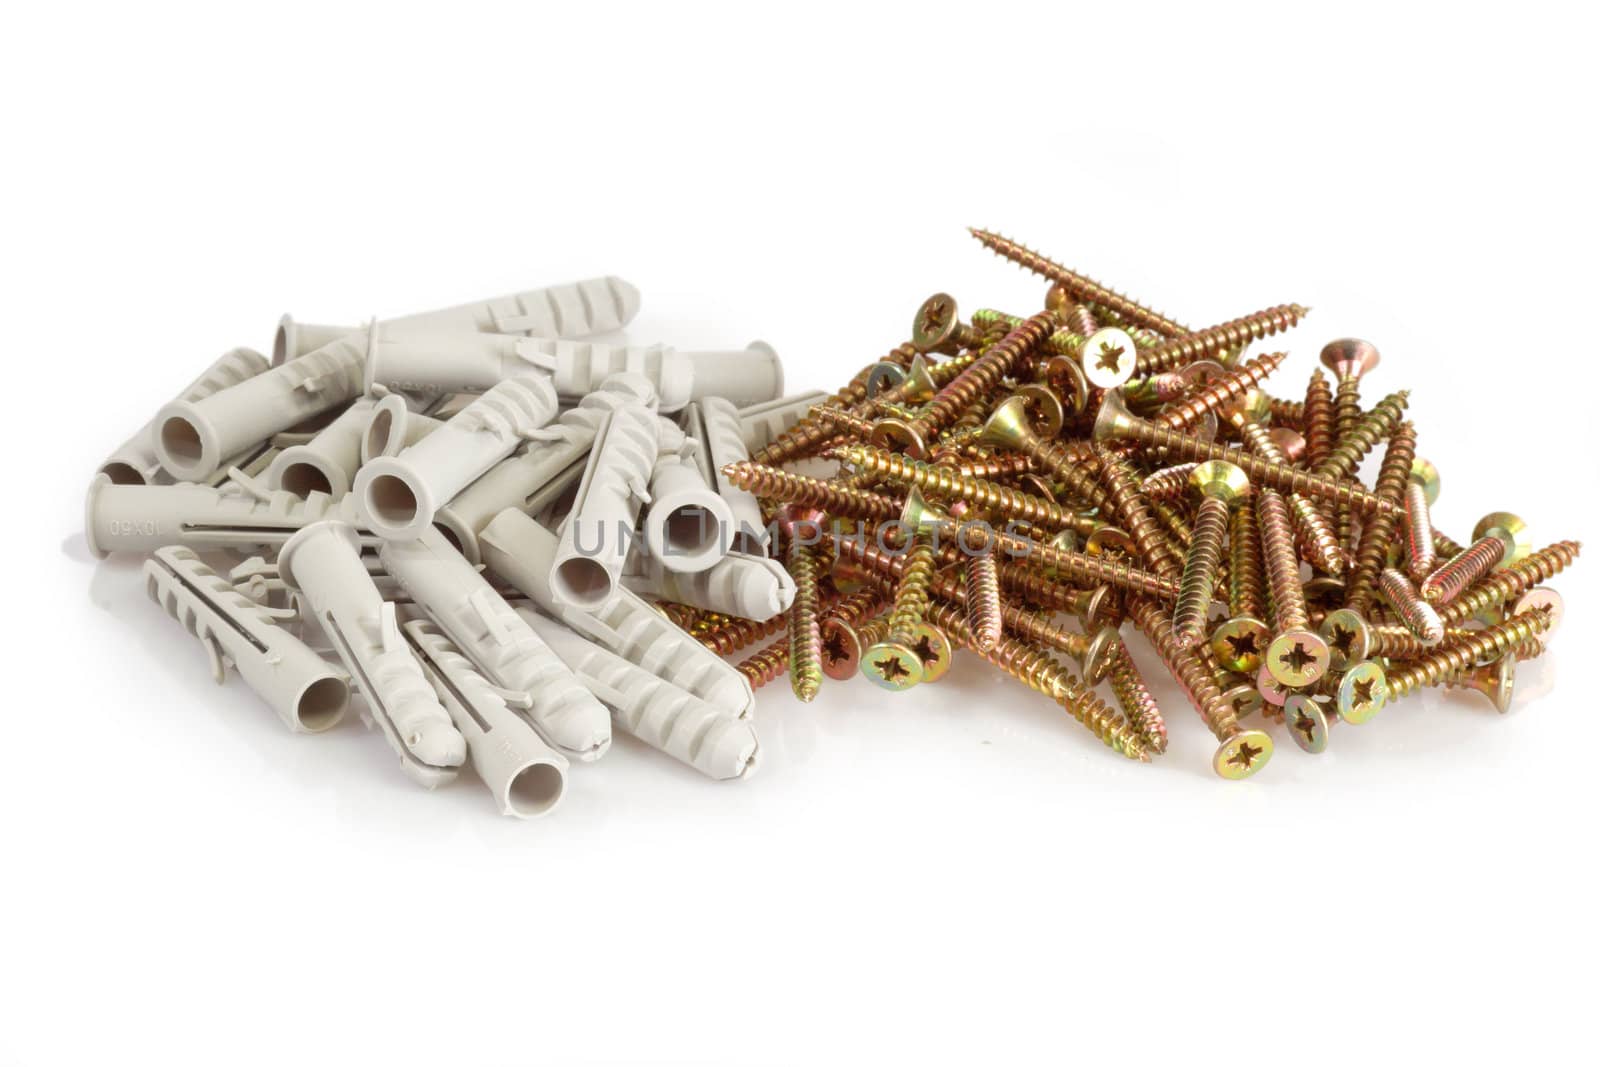 A pile screws and dowels on bright background